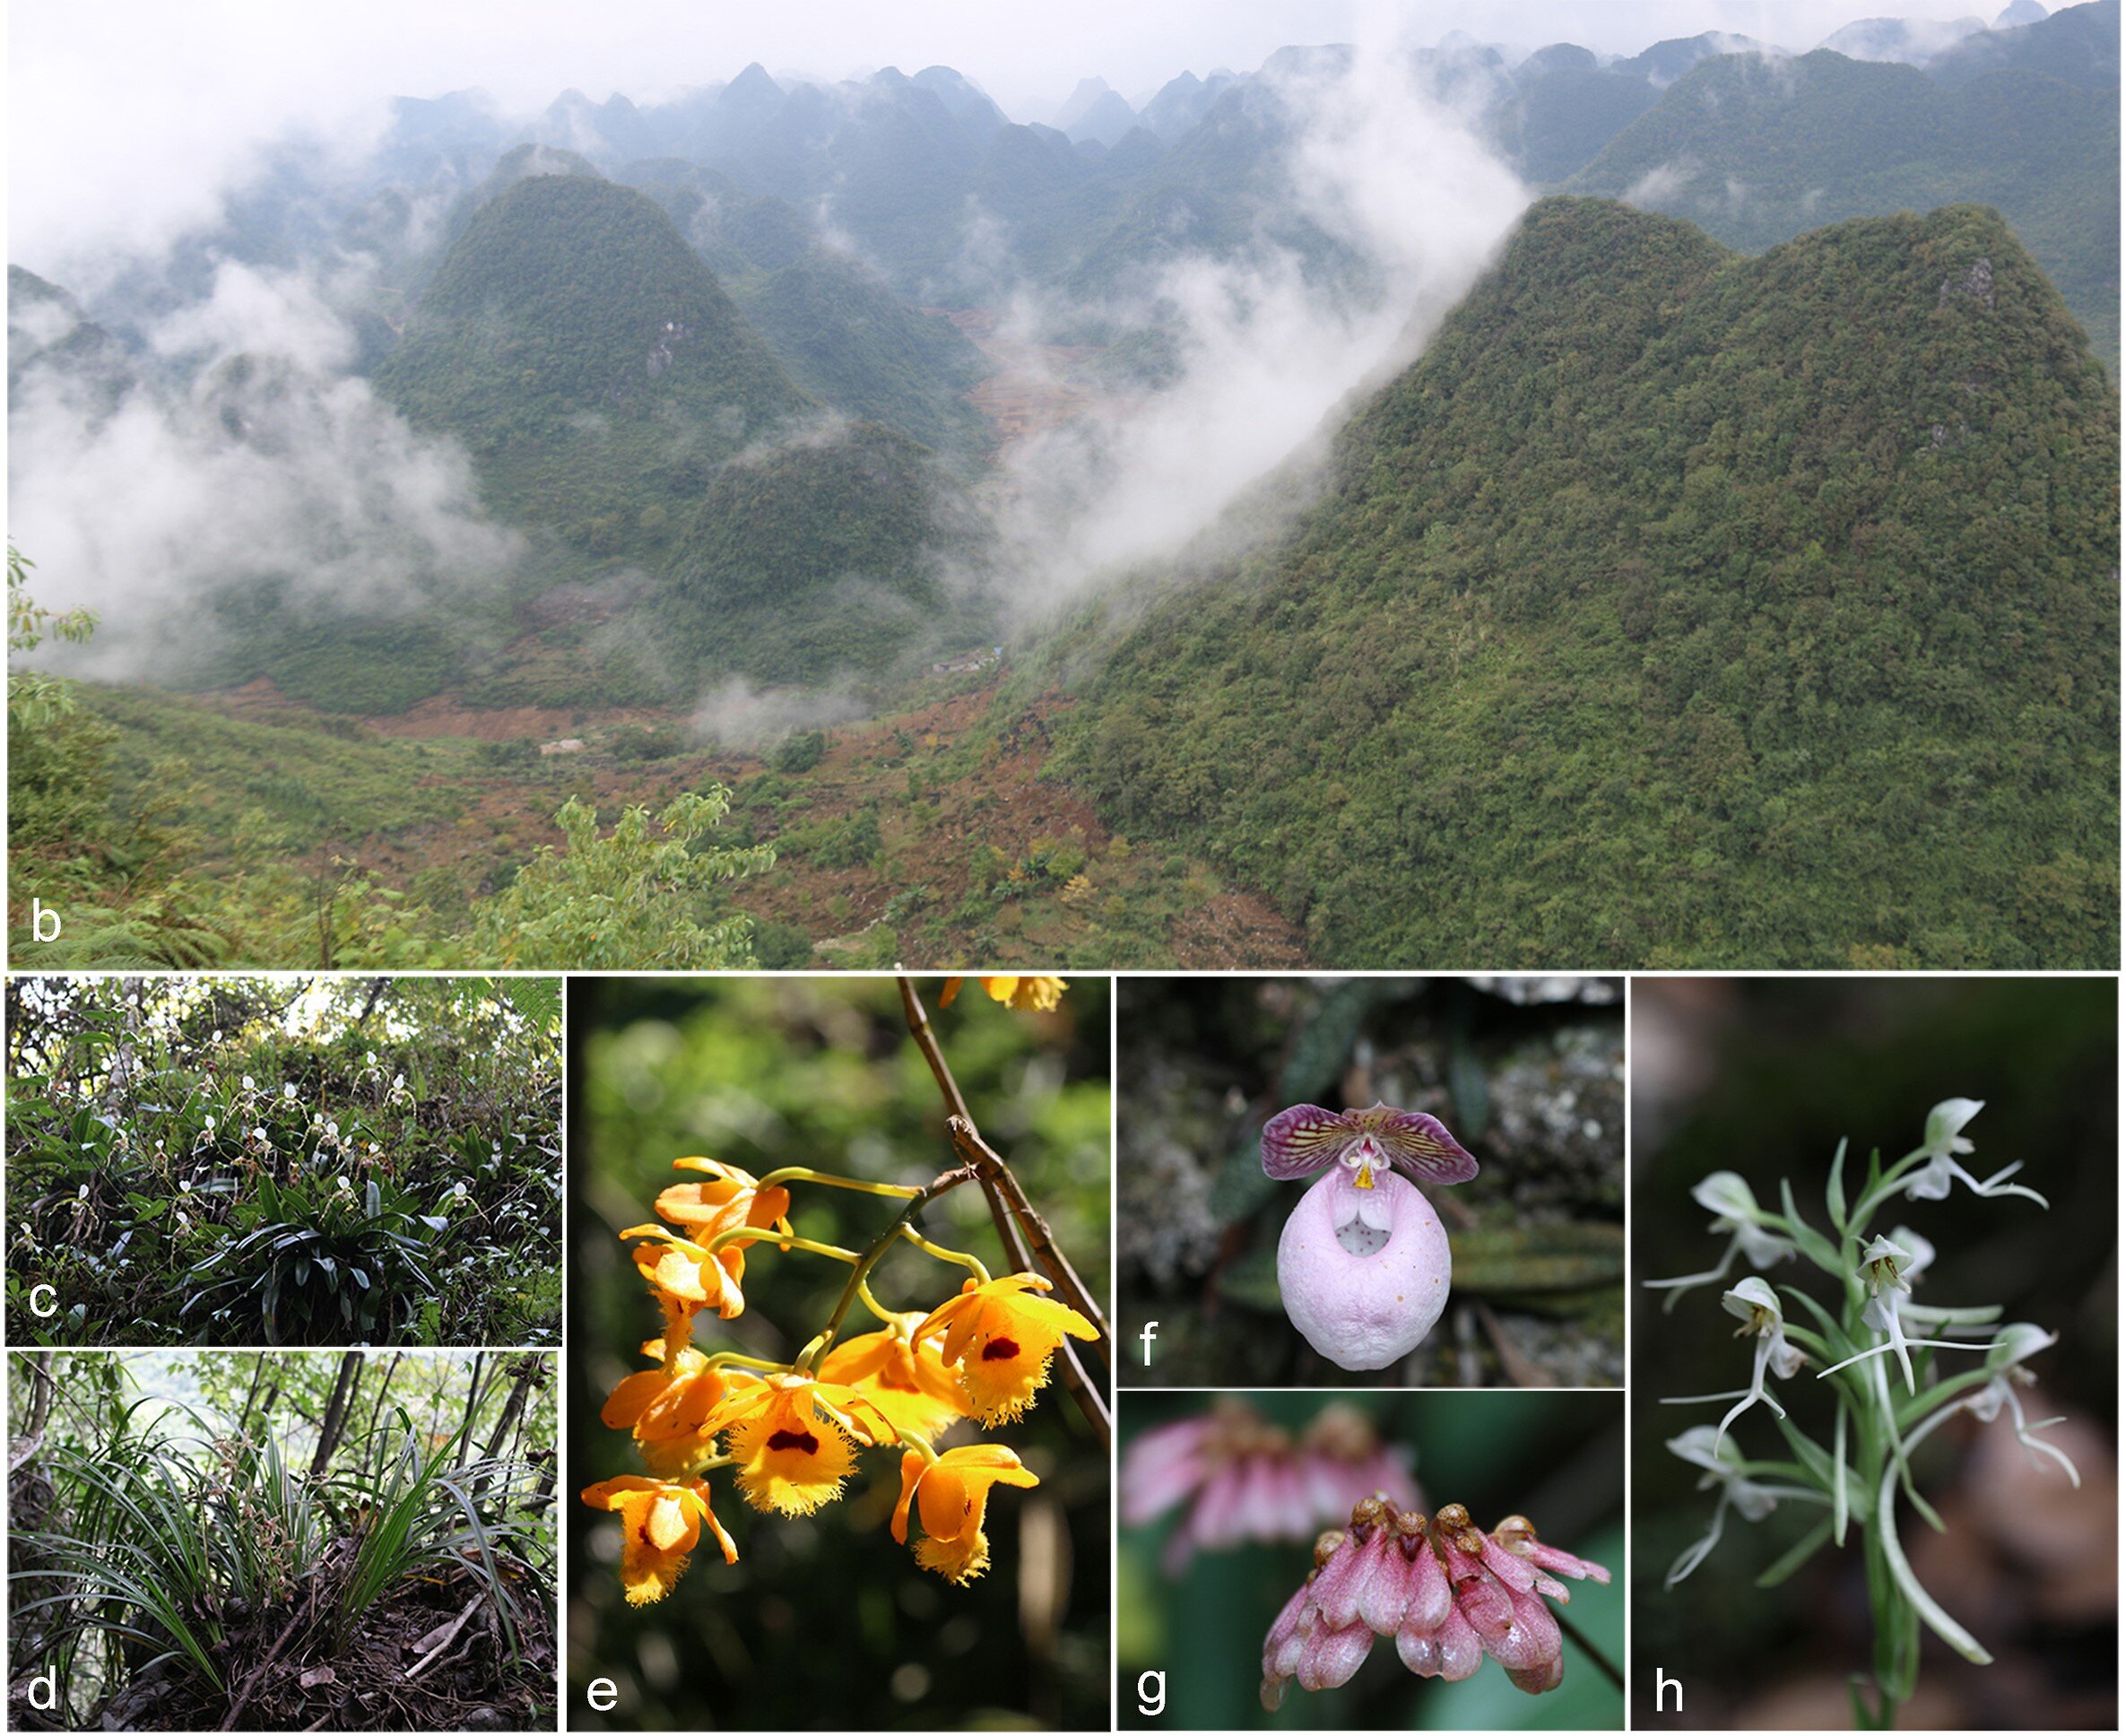 photo of More efforts are needed to protect orchids in karst forests image